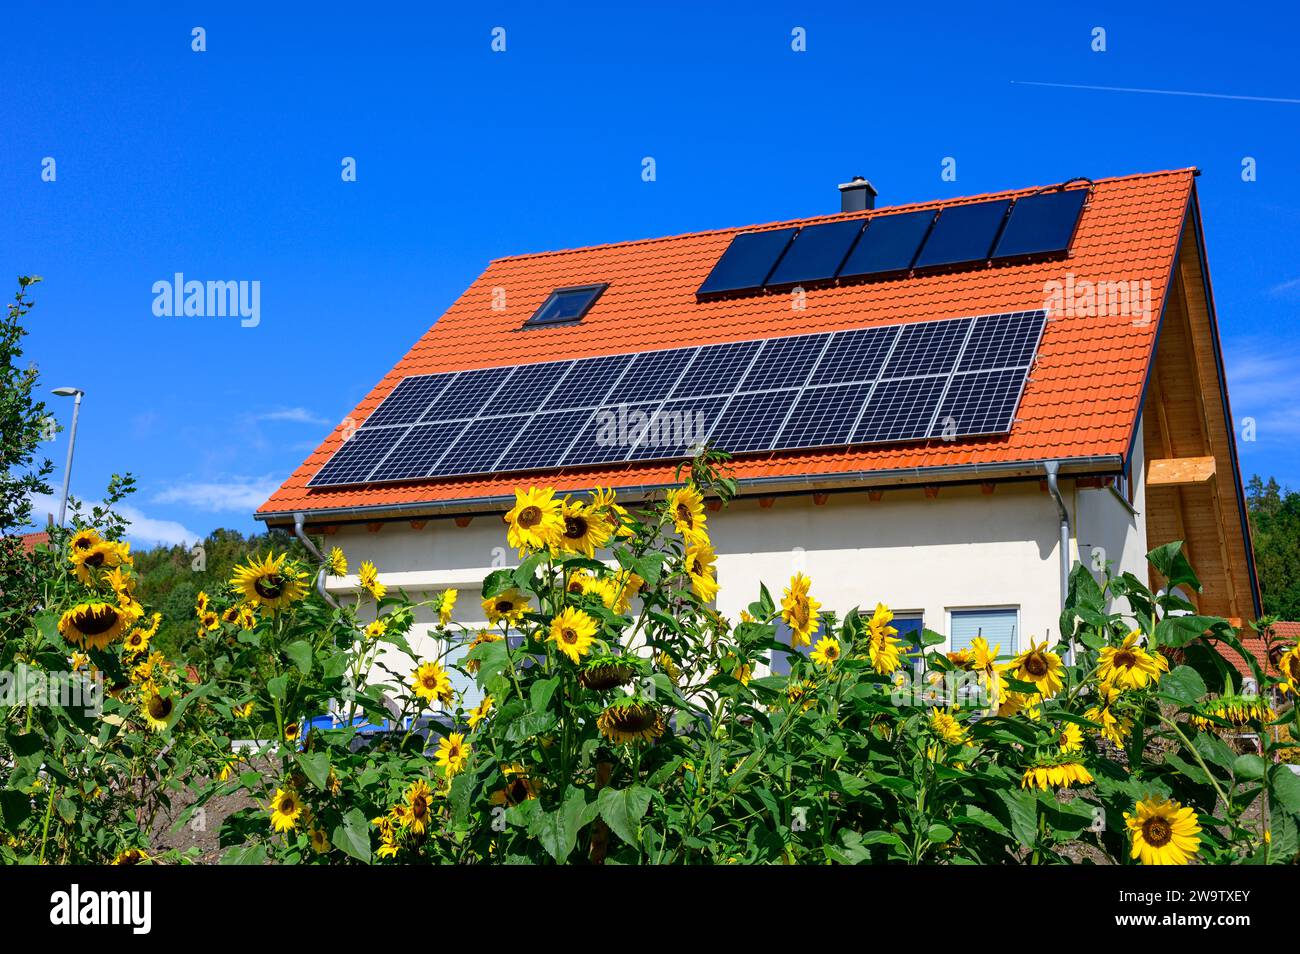 Modern solar roof on a newly built detached house against a blue sky with sunflowers in the foreground Stock Photo